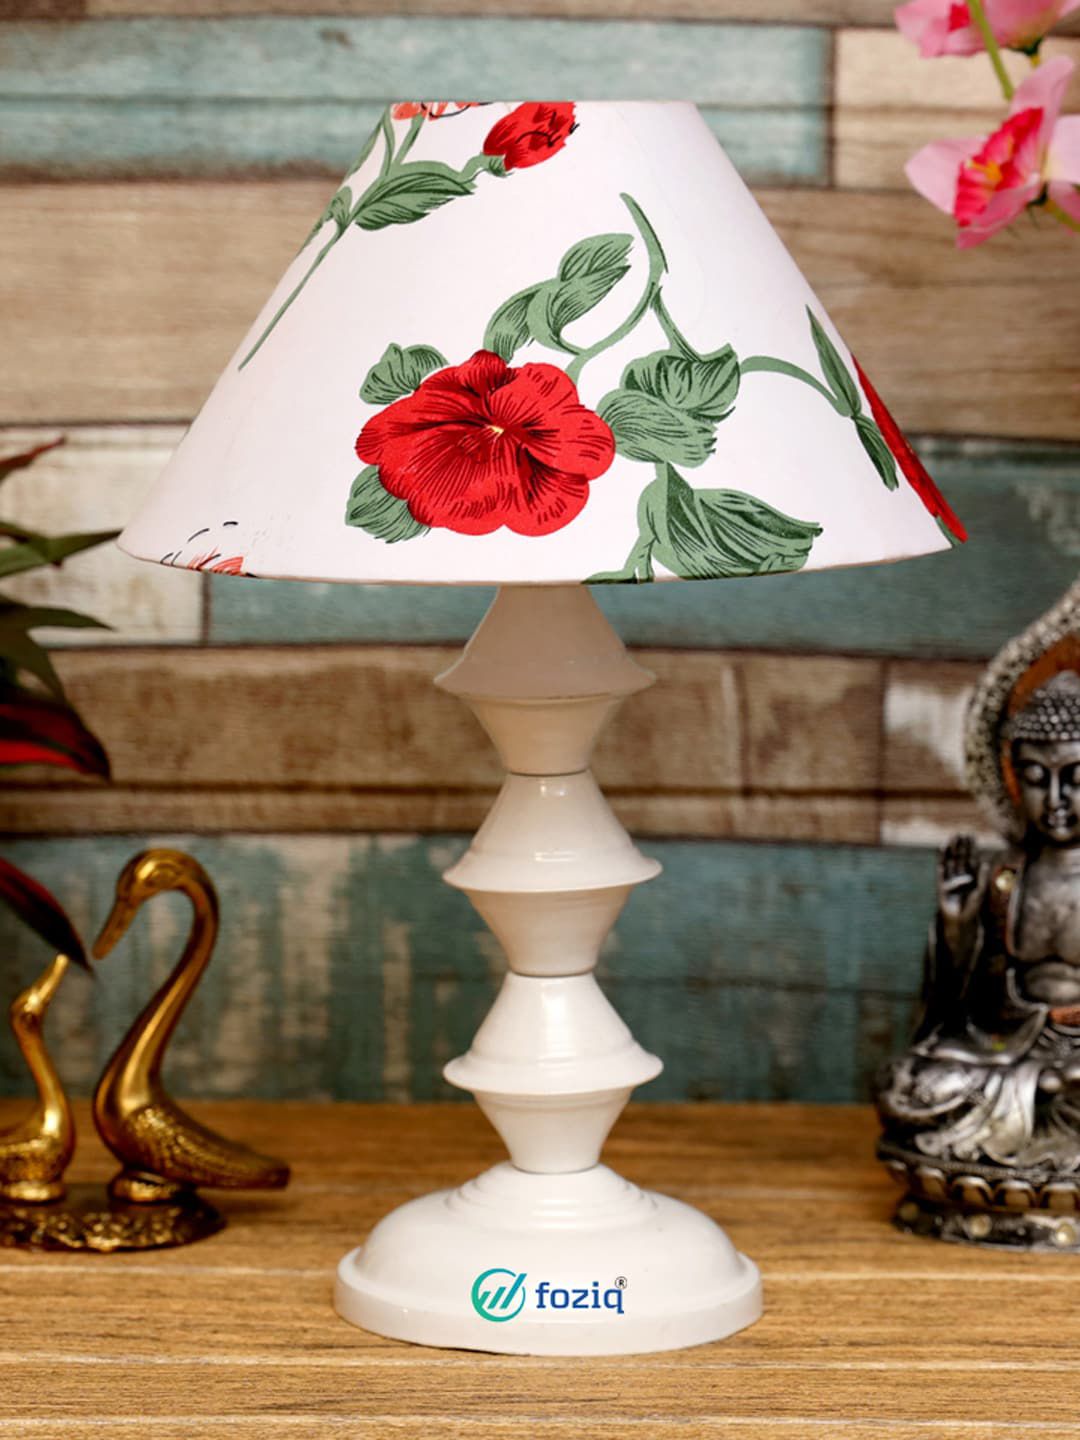 foziq White & Red Floral Printed Table Lamp Price in India